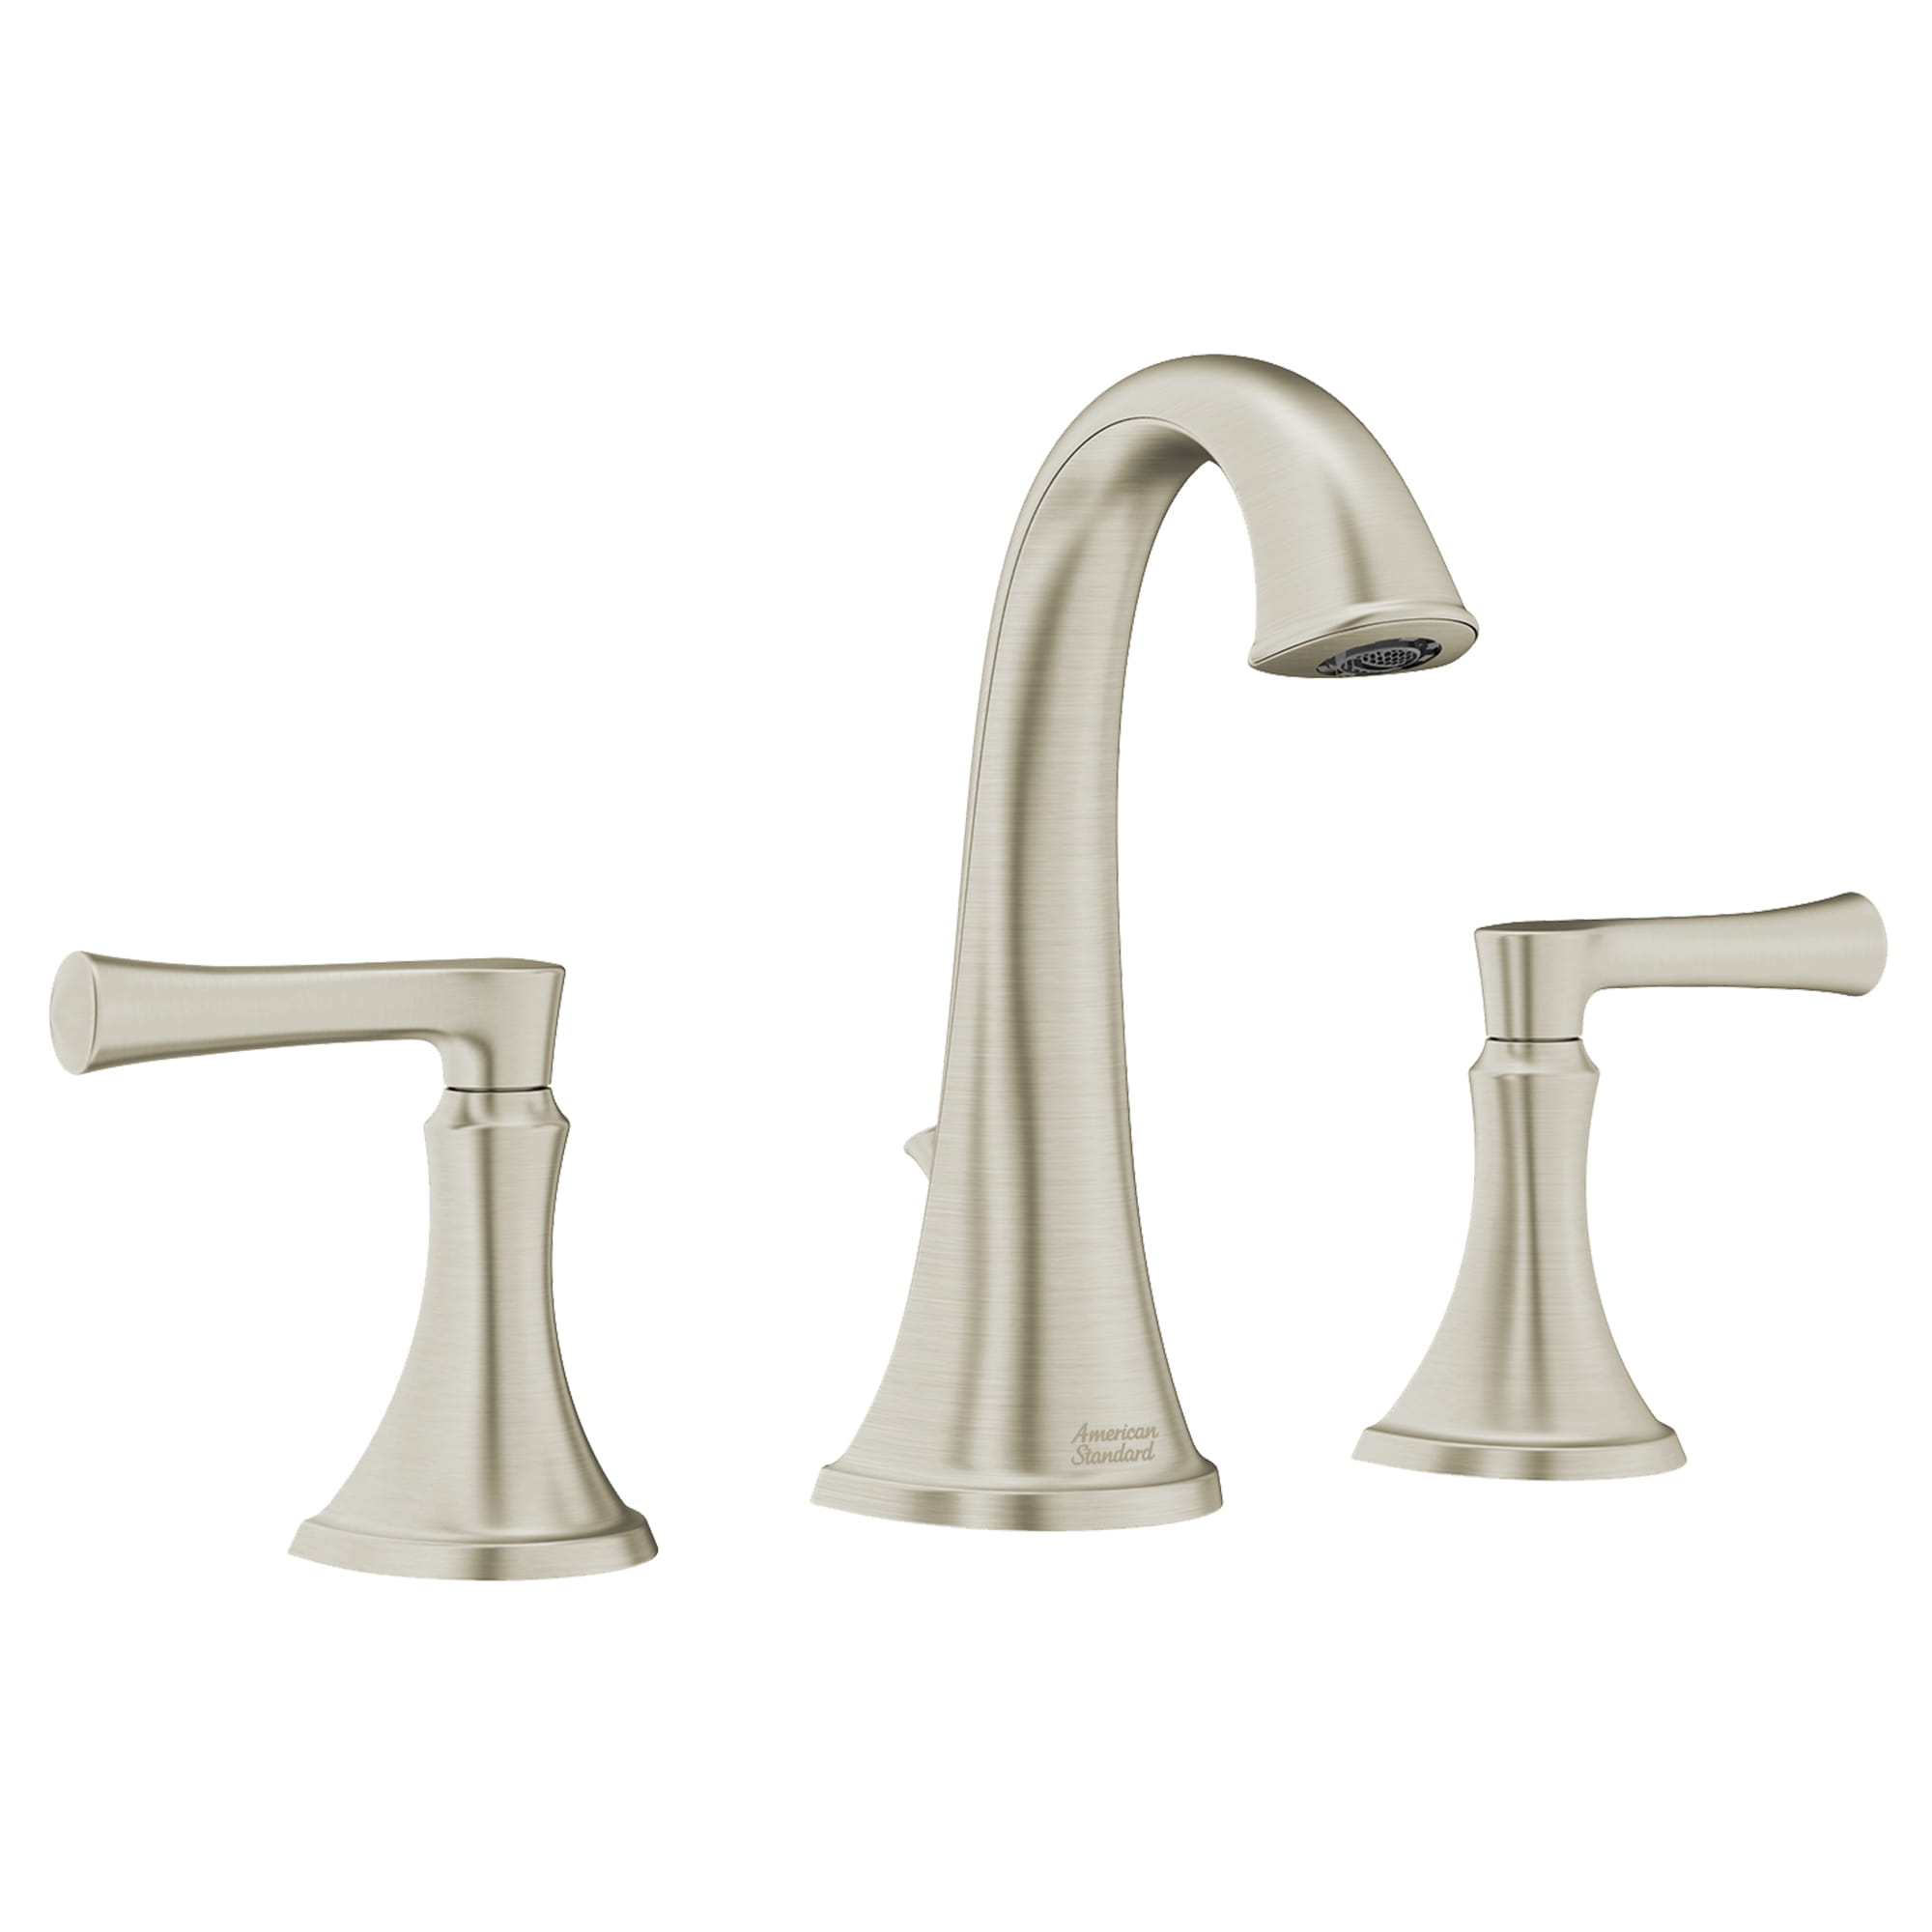 Estate 8 Inch Widespread 2 Handle Bathroom Faucet 12 gmp 45 L min With Lever Handles   BRUSHED NICKEL